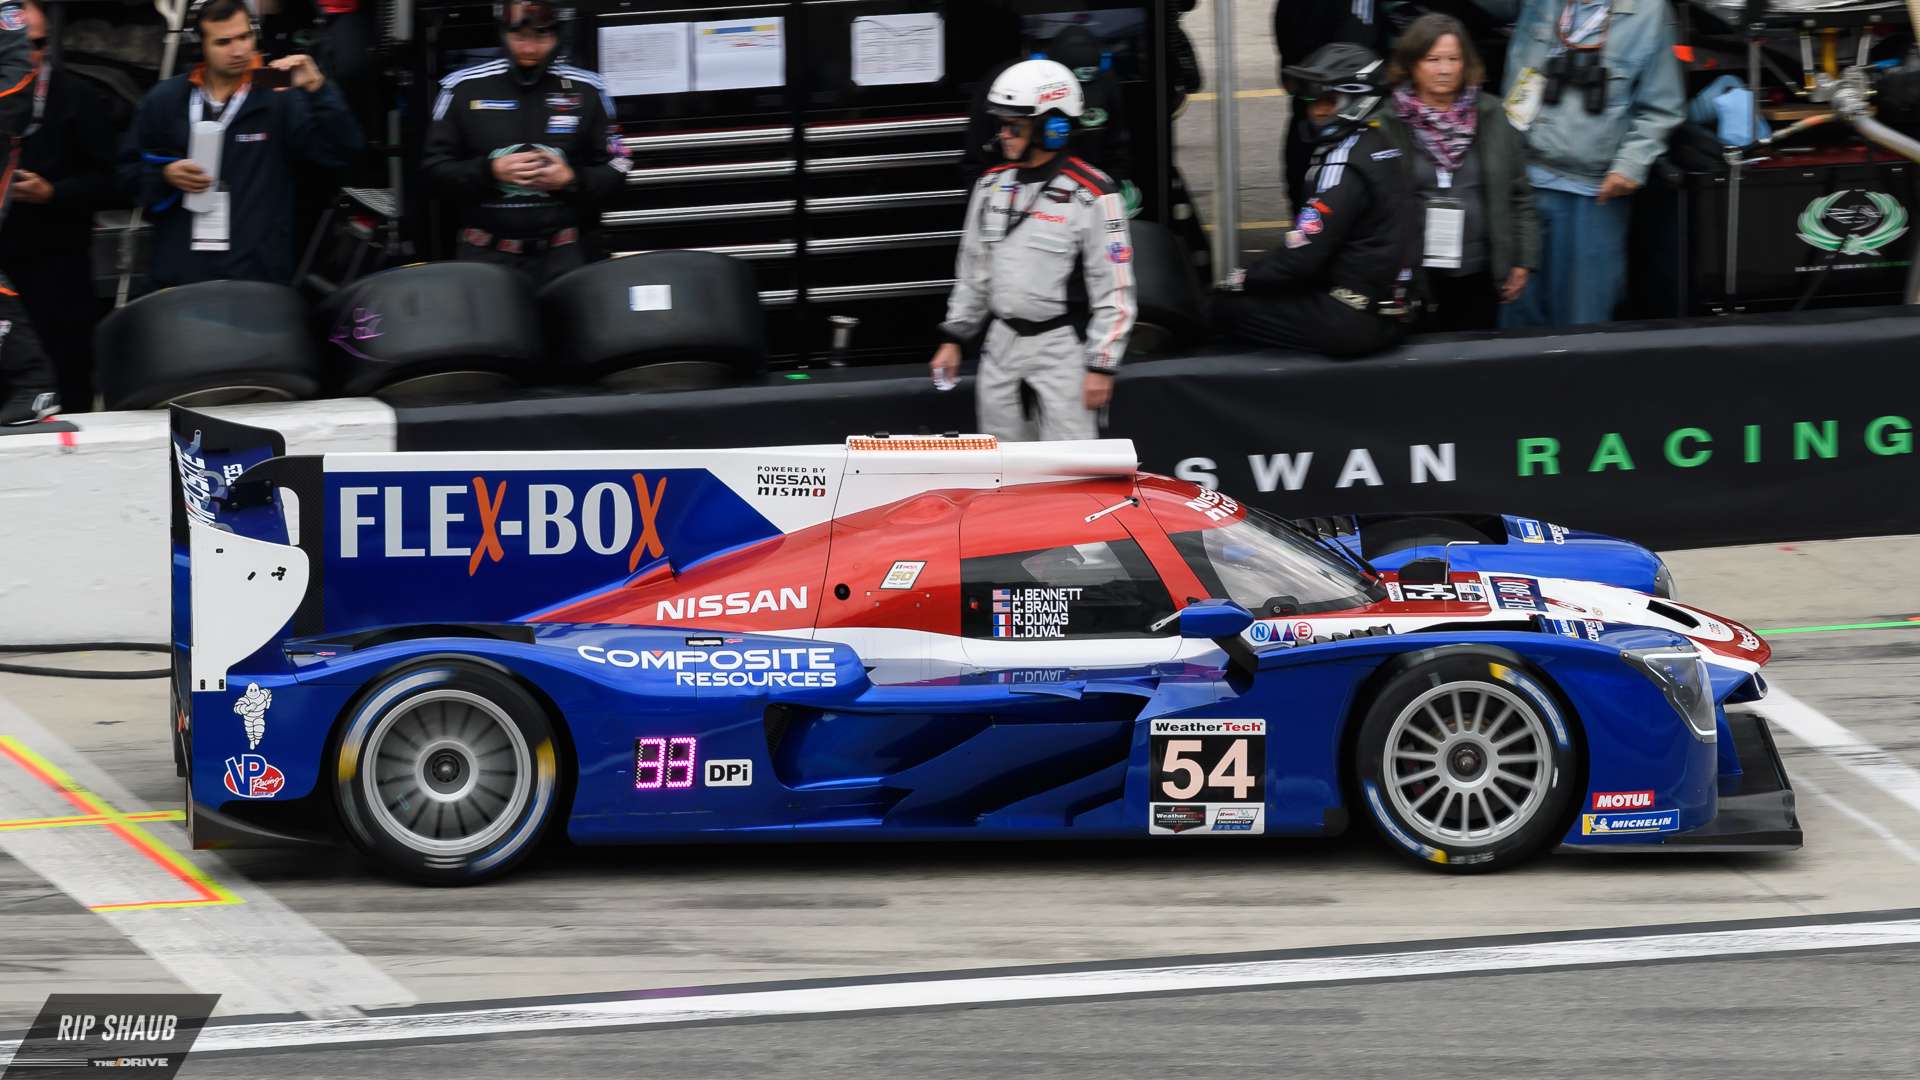 Hottest Liveries From the 2019 Rolex 24 at Daytona